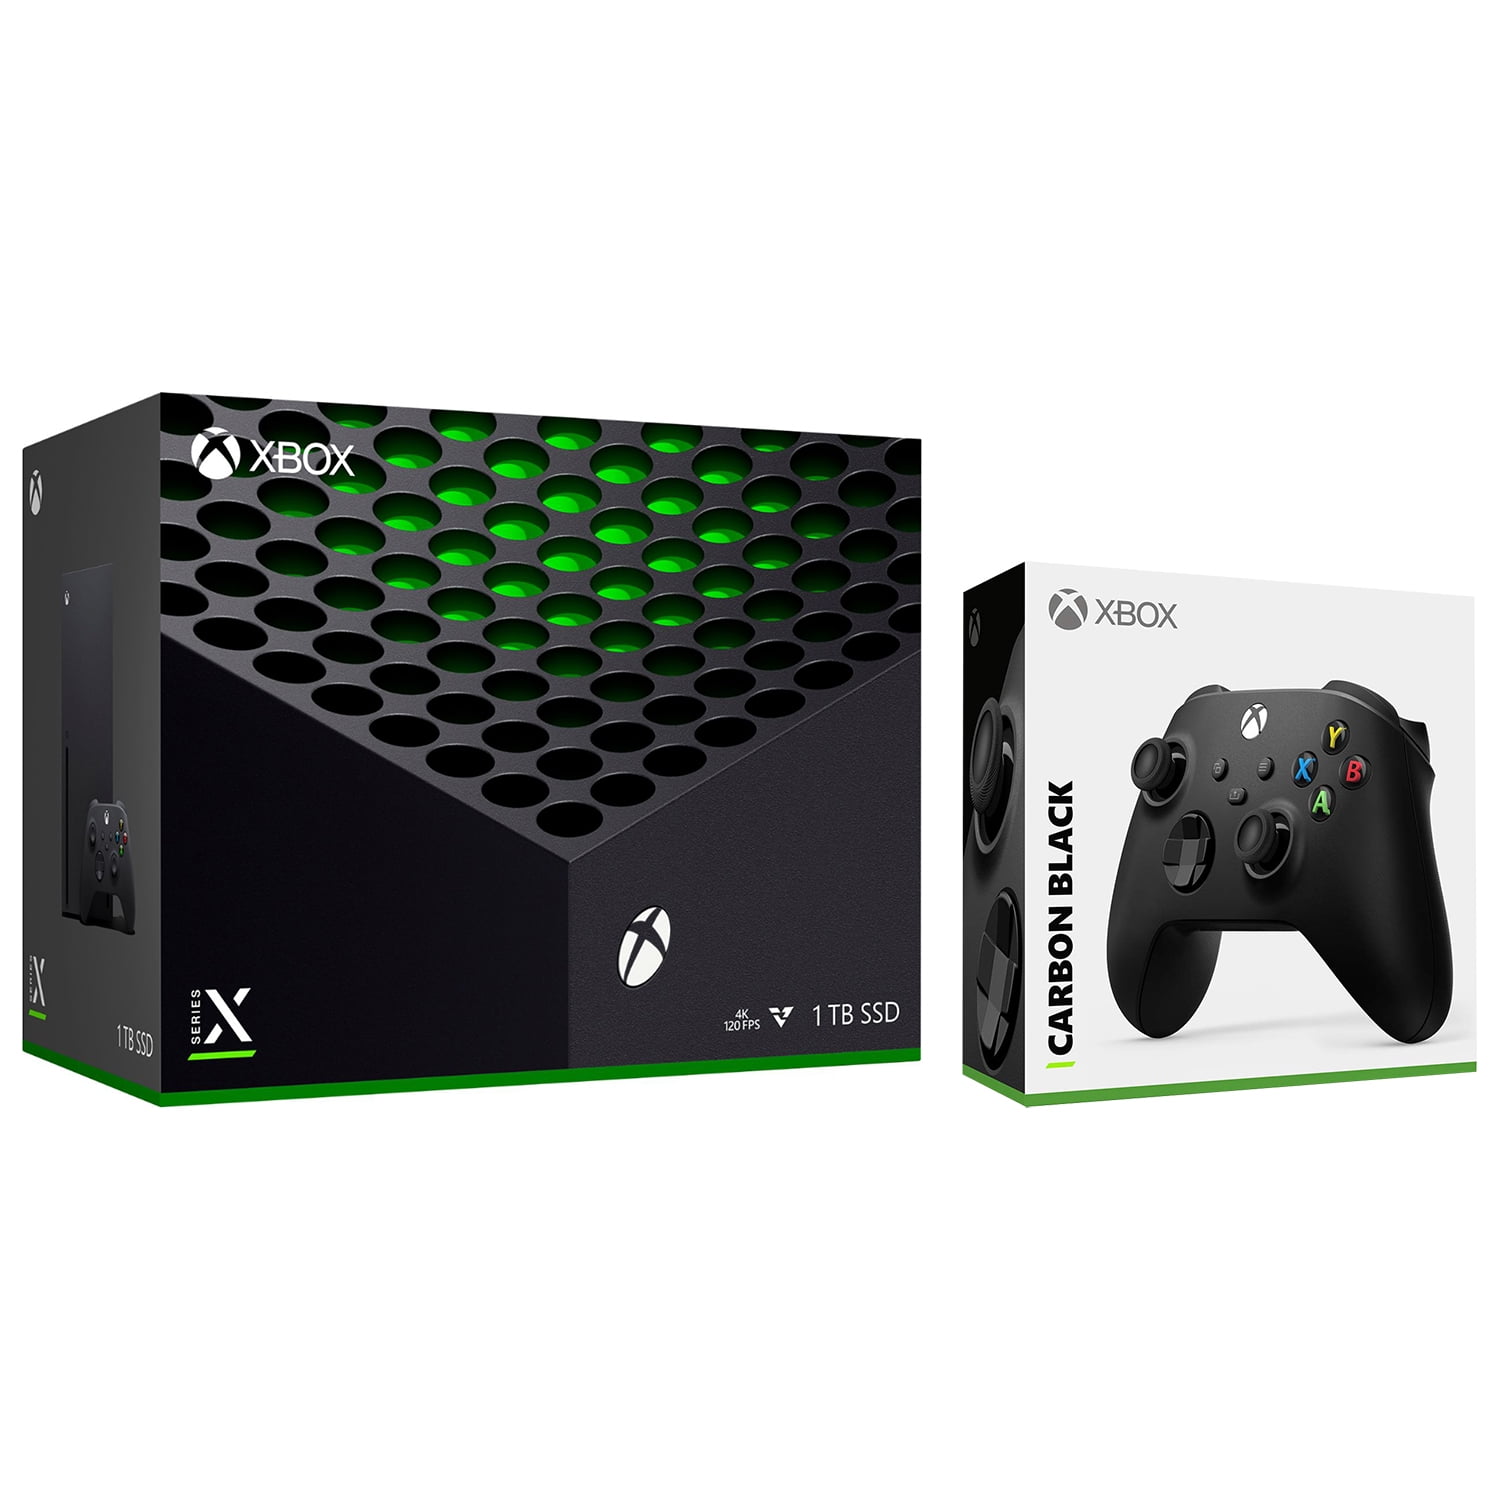  Microsoft Xbox Series S 1TB SSD Console Carbon Black - Includes  Xbox Wireless Controller - Up to 120 frames per second - 10GB RAM 1TB SSD -  Experience high dynamic range 